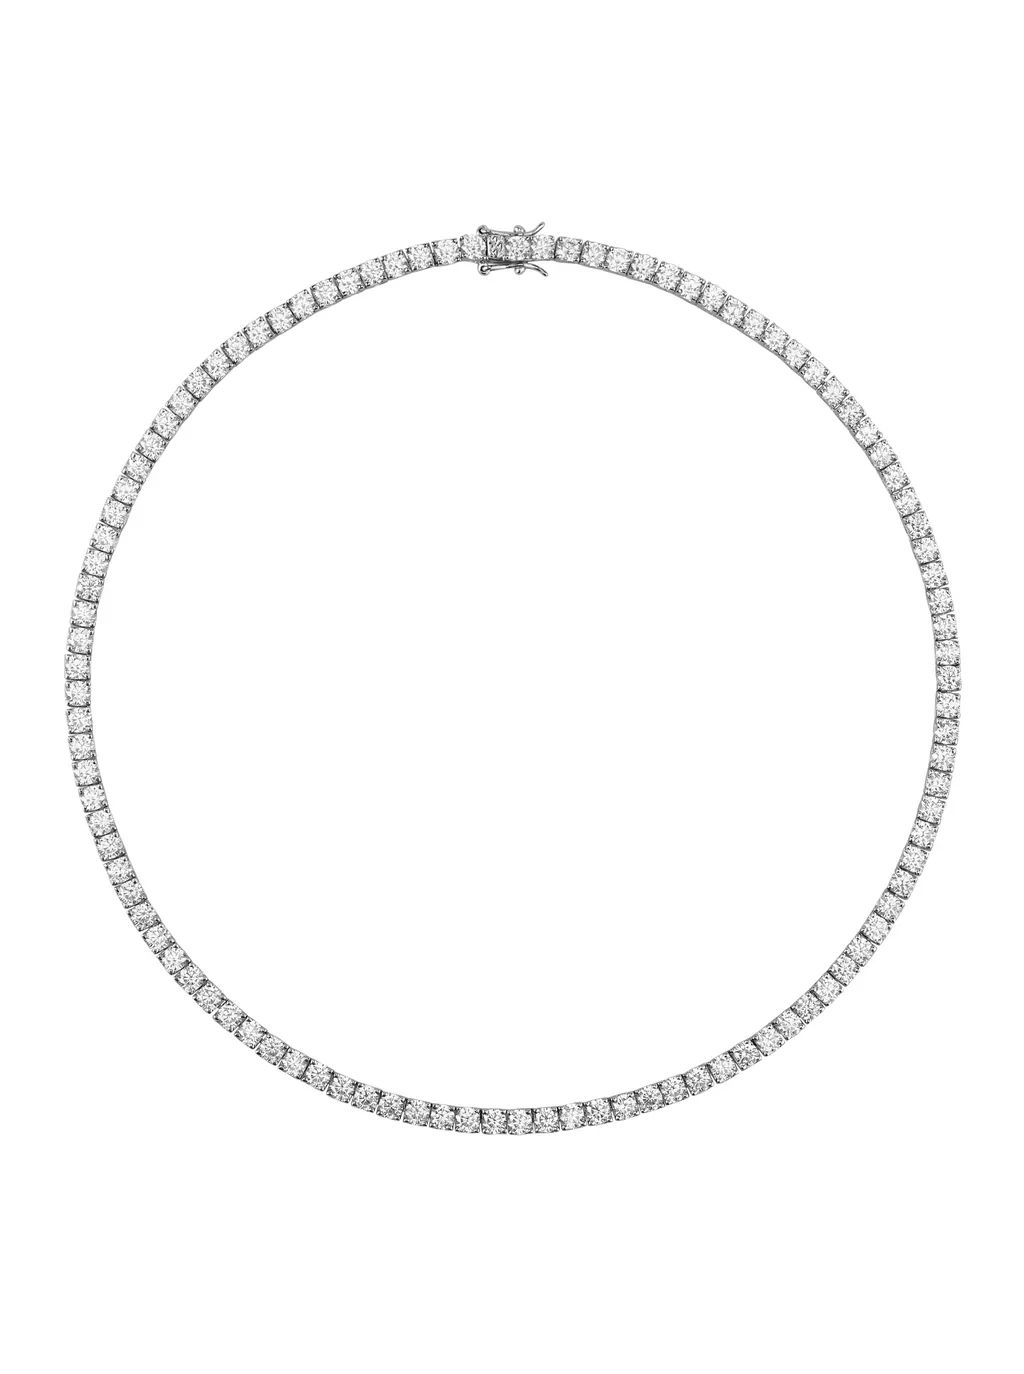 KATE ROUND CUT, LAB-GROWN WHITE SAPPHIRE SILVER RIVIERE NECKLACE | Dorsey